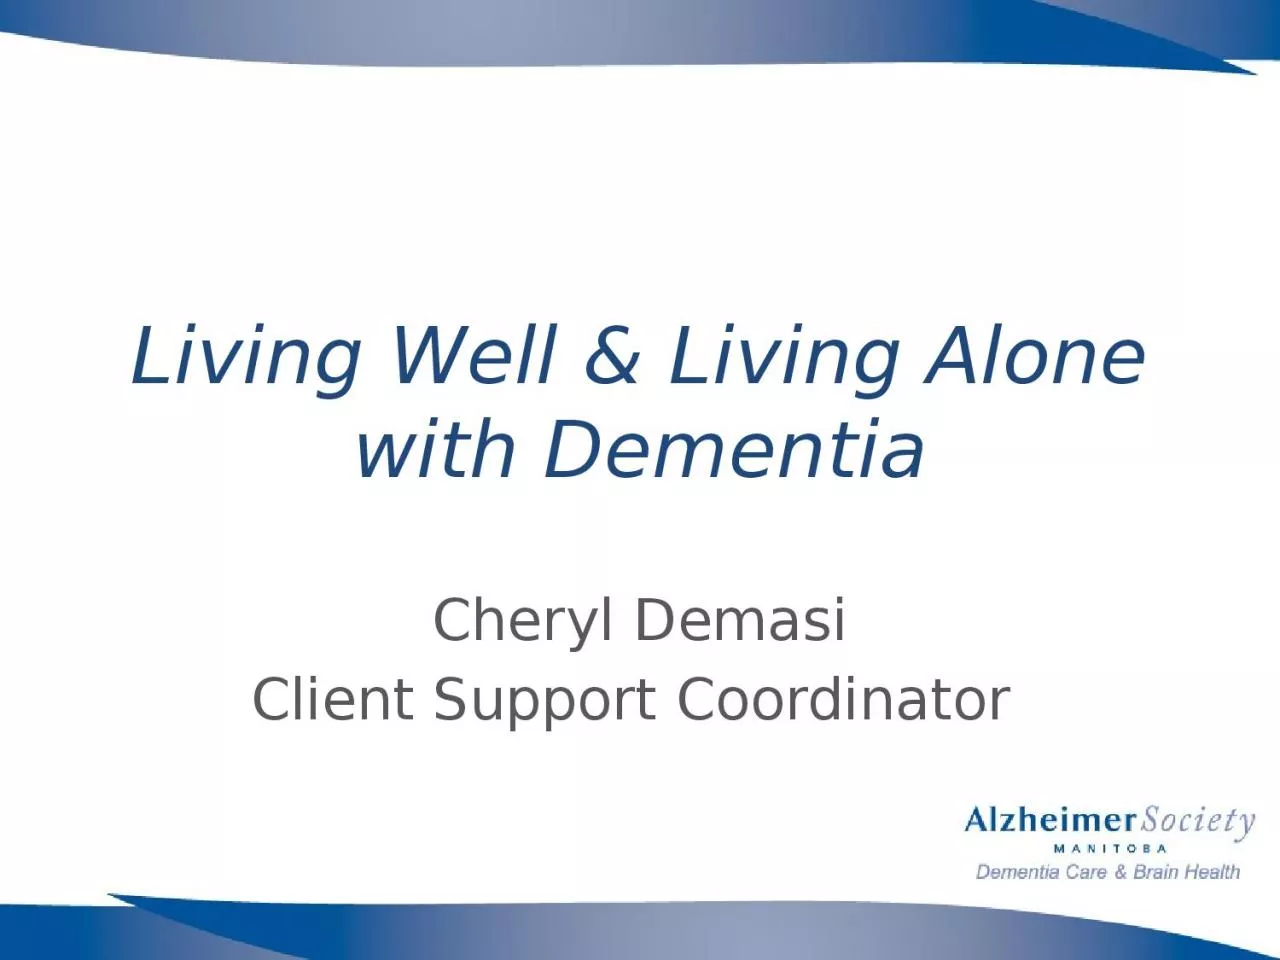 Living Well & Living Alone with Dementia